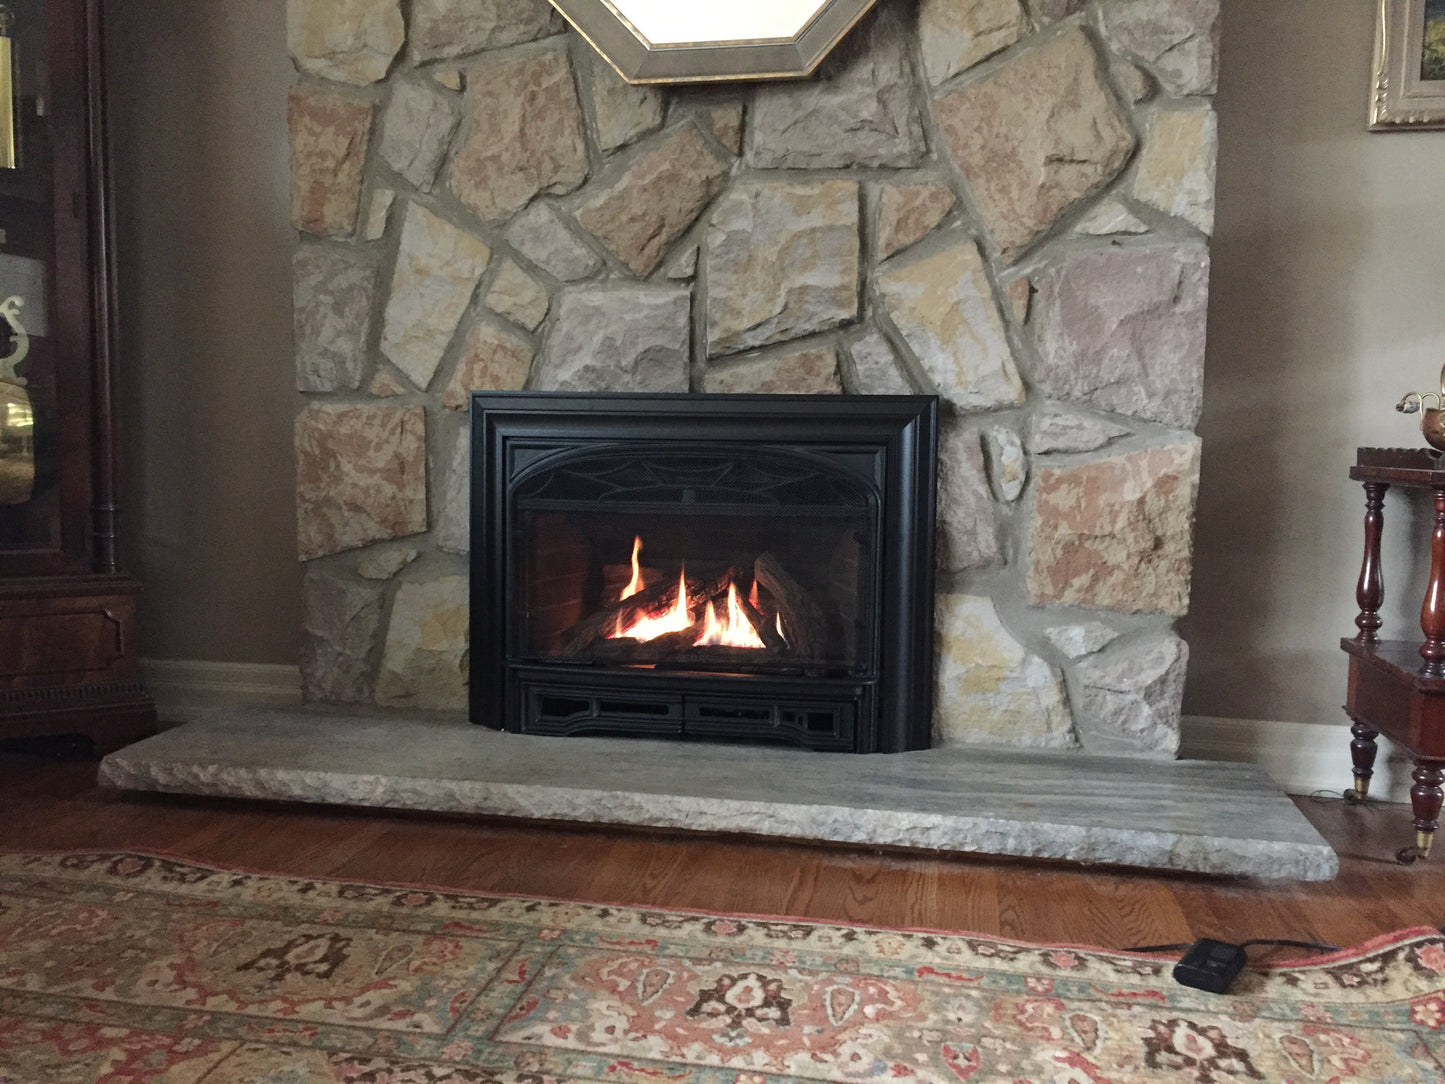 Valor Legend G3 Gas Insert Fireplace in Stone Hearth and Mantel in Calgary Home Renovation